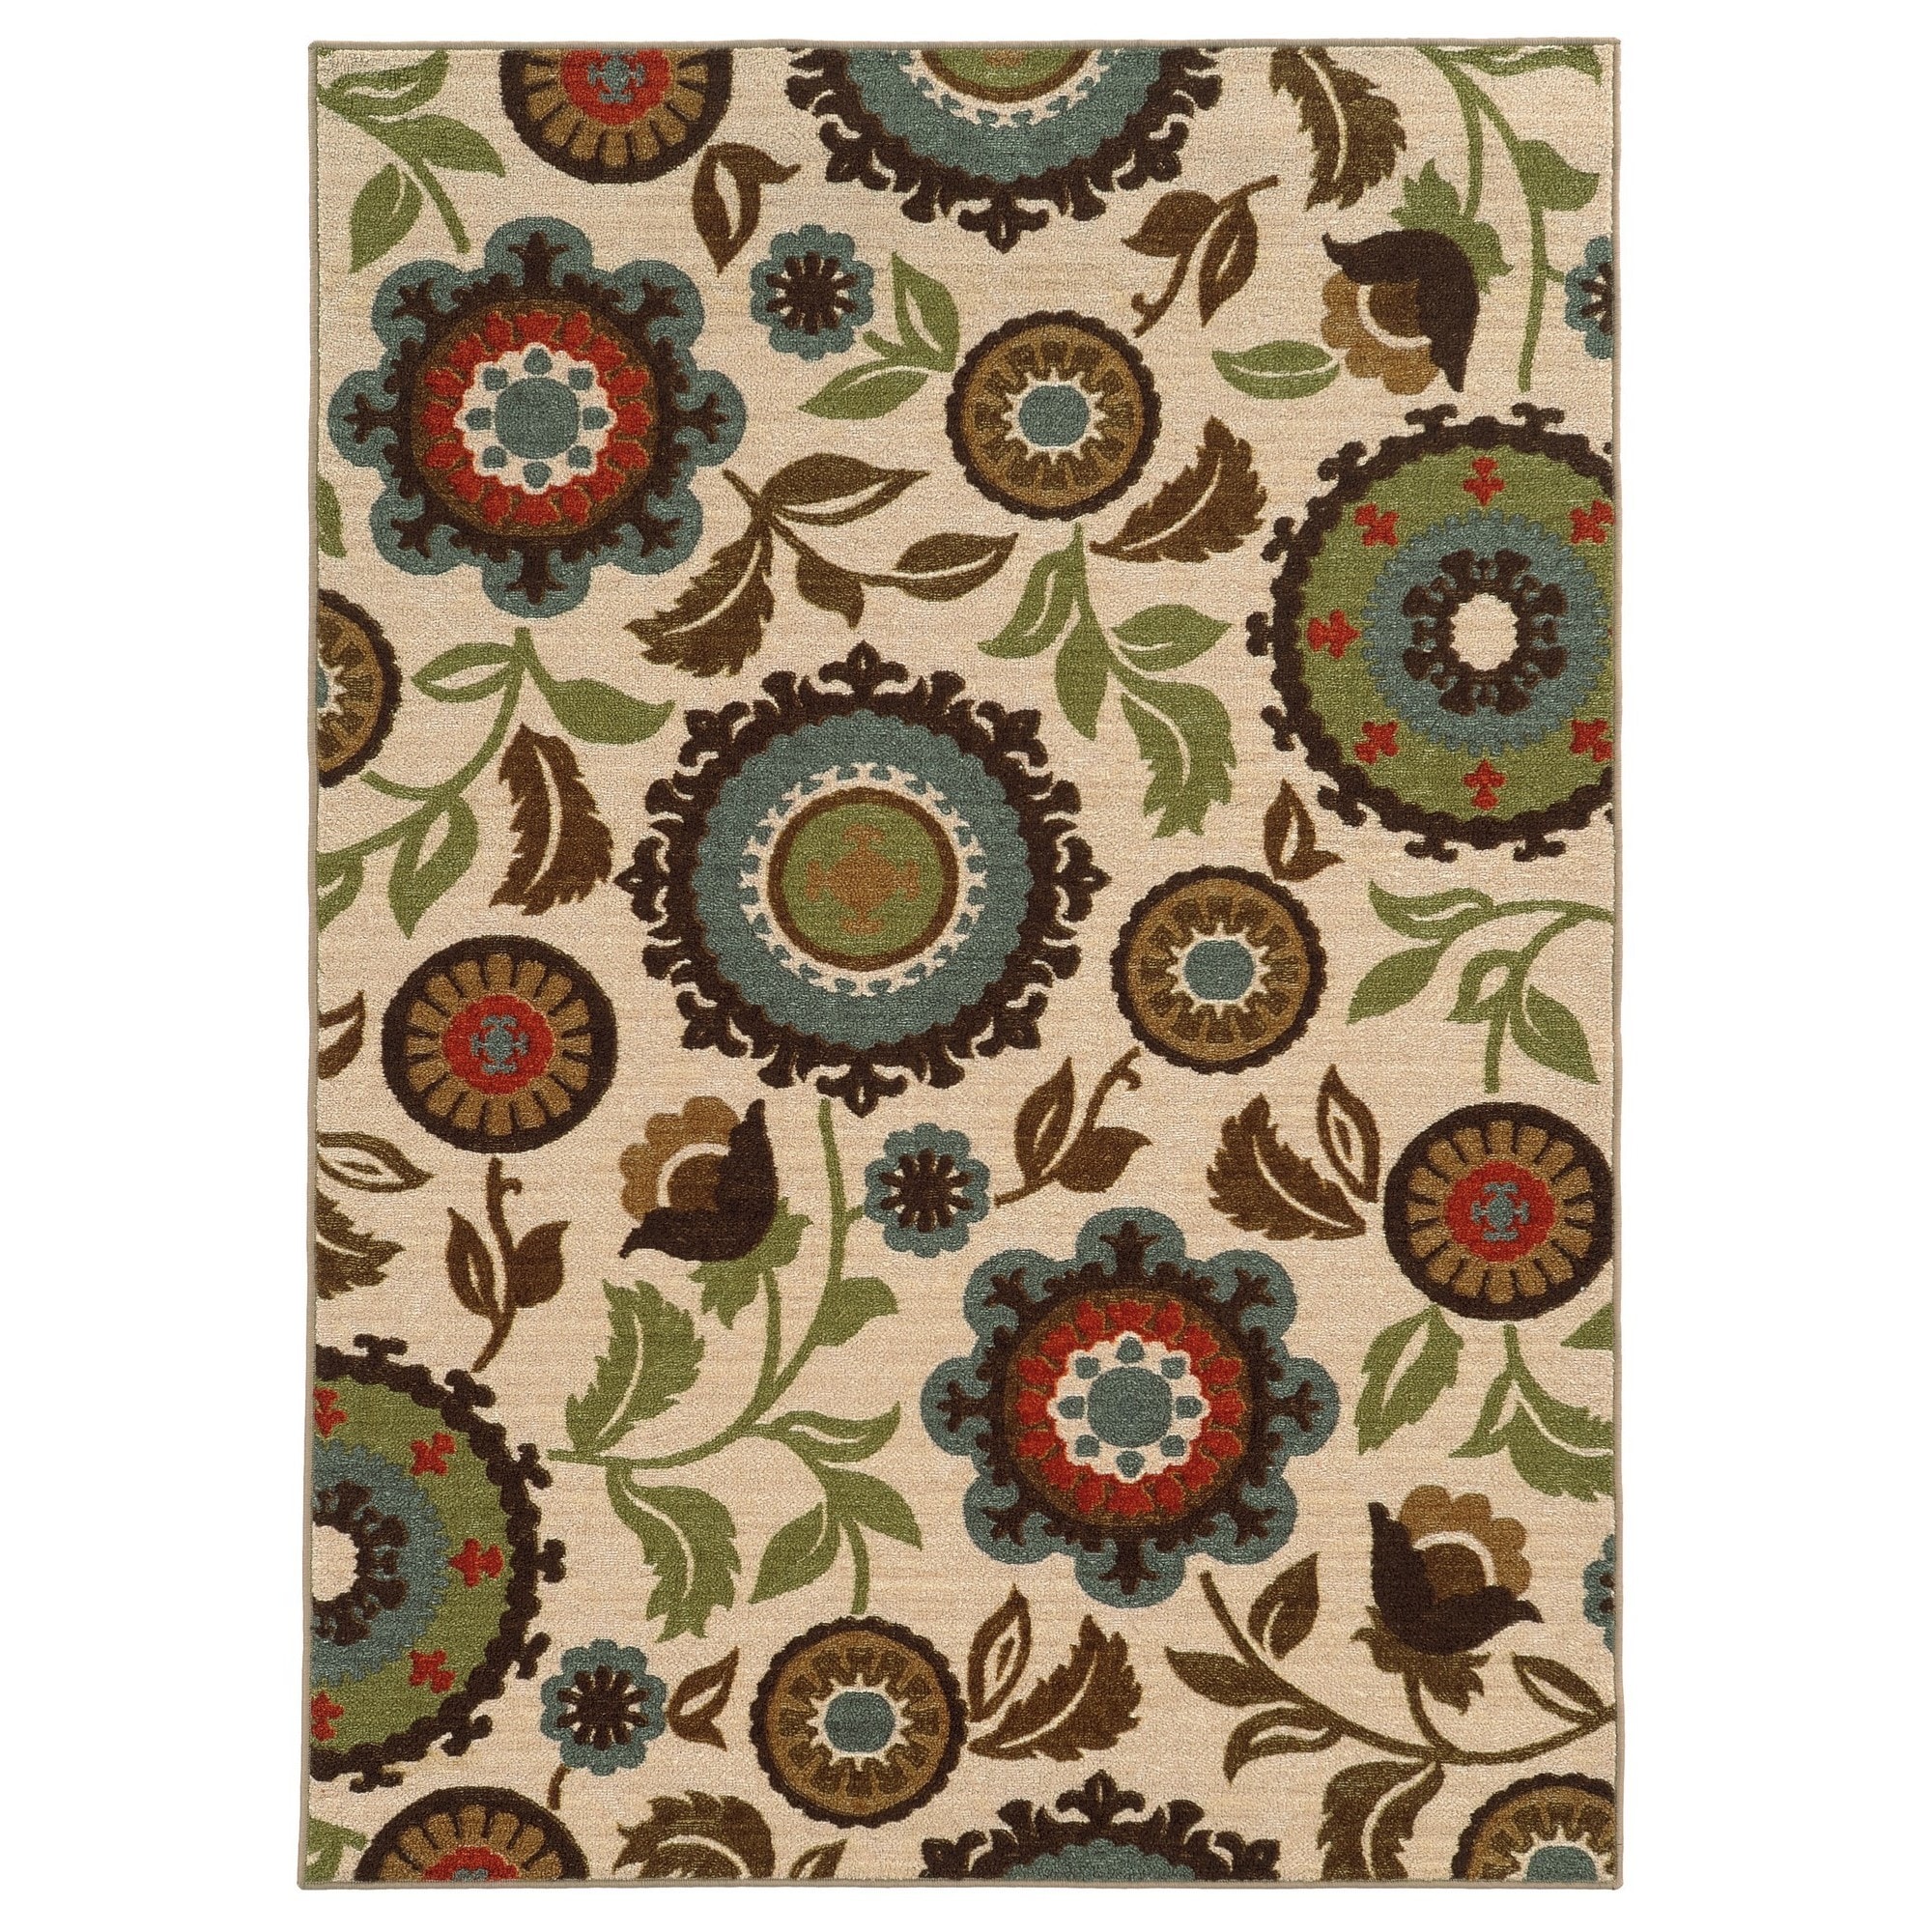 Loop Pile Over Scale Floral Ivory/ Multi Nylon Rug (53 X 73)